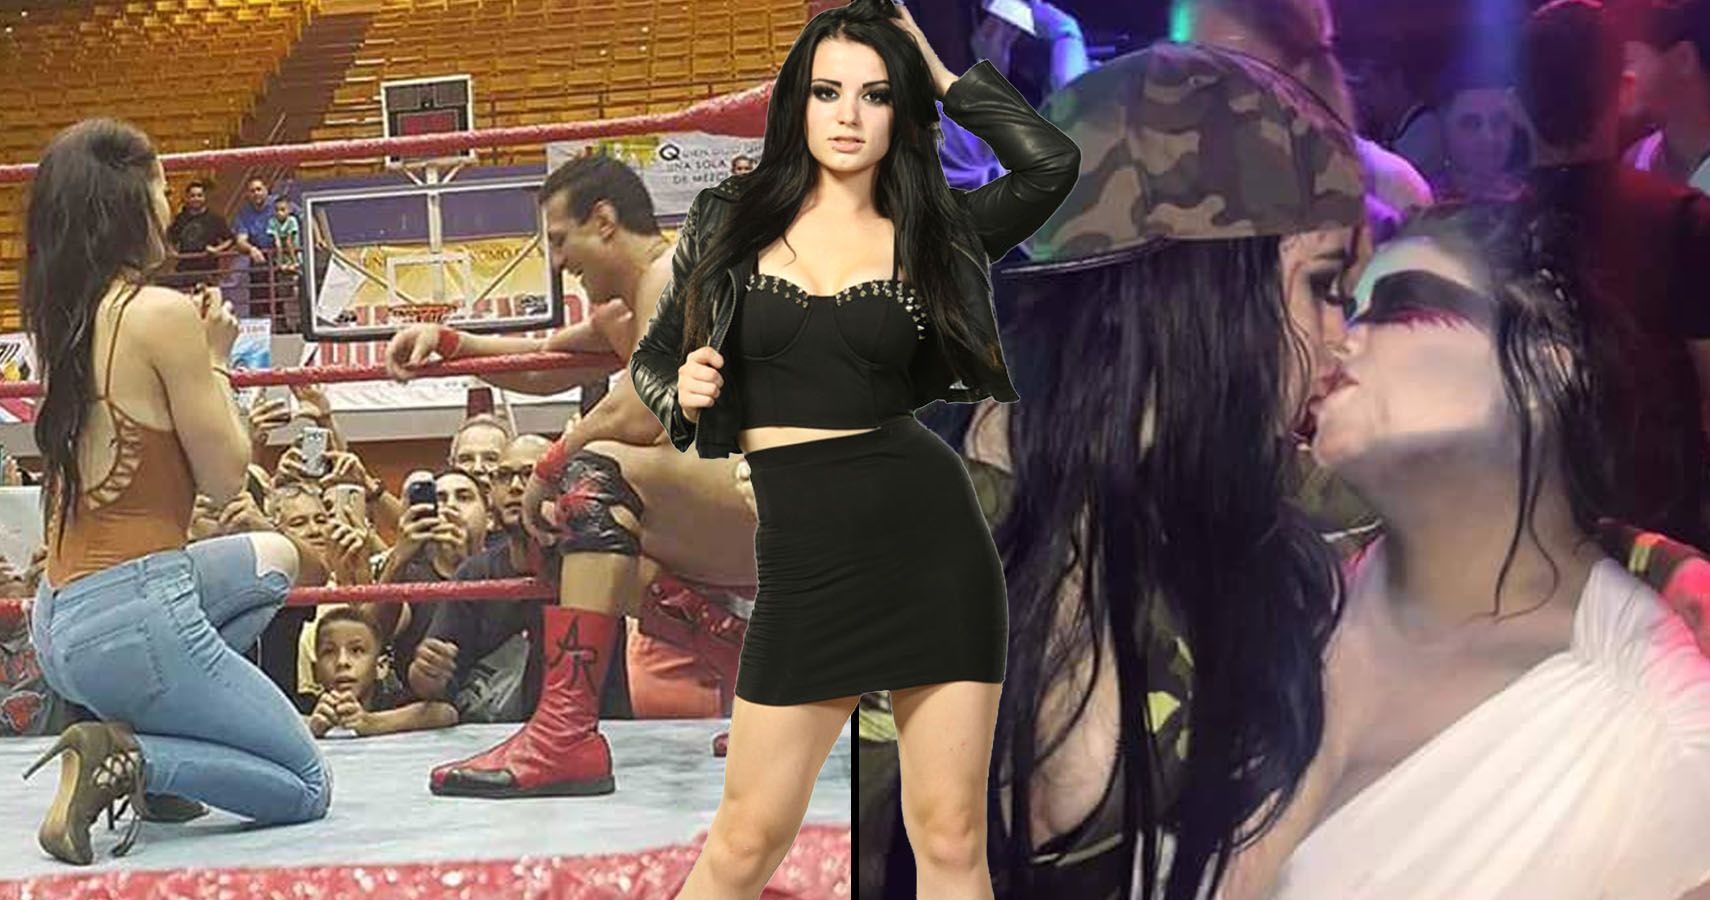 Pictures Of Paige WWE Doesn't Want You To See.